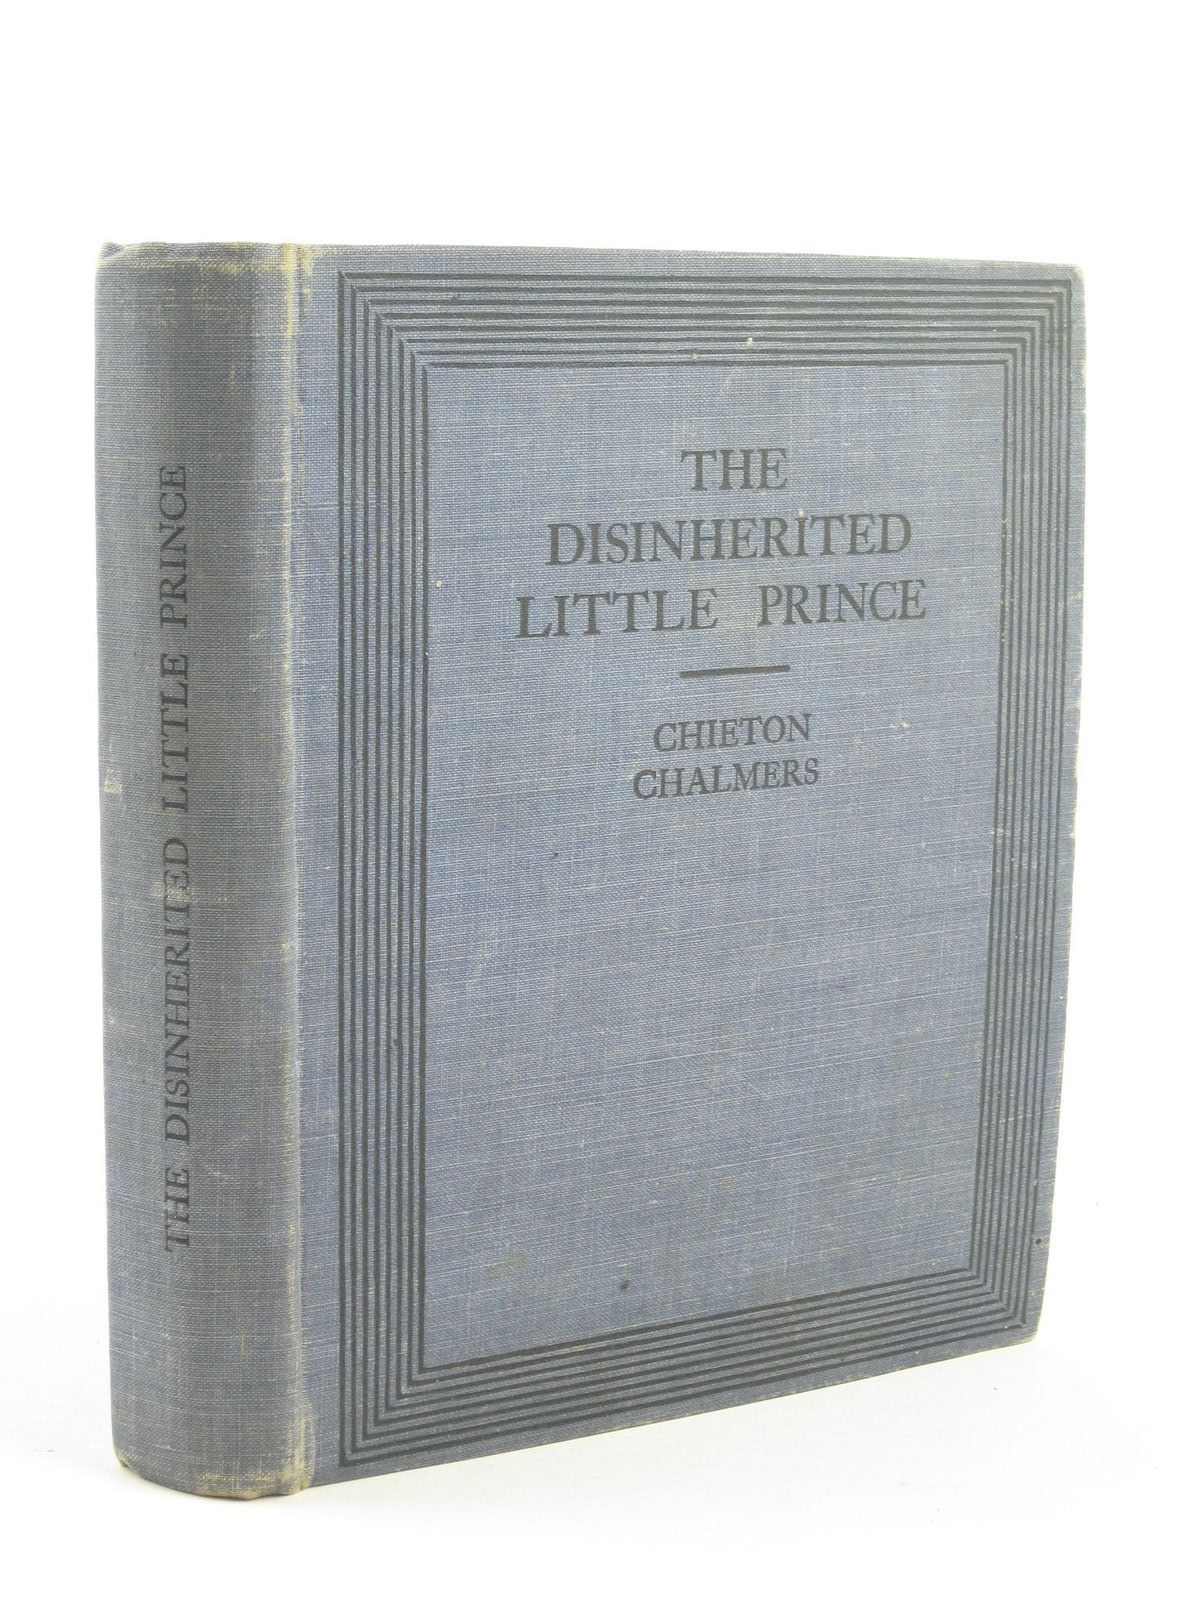 Photo of THE DISINHERITED LITTLE PRINCE written by Chalmers, Chieton published by Wells Gardner, Darton &amp; Co. Ltd. (STOCK CODE: 1501548)  for sale by Stella & Rose's Books